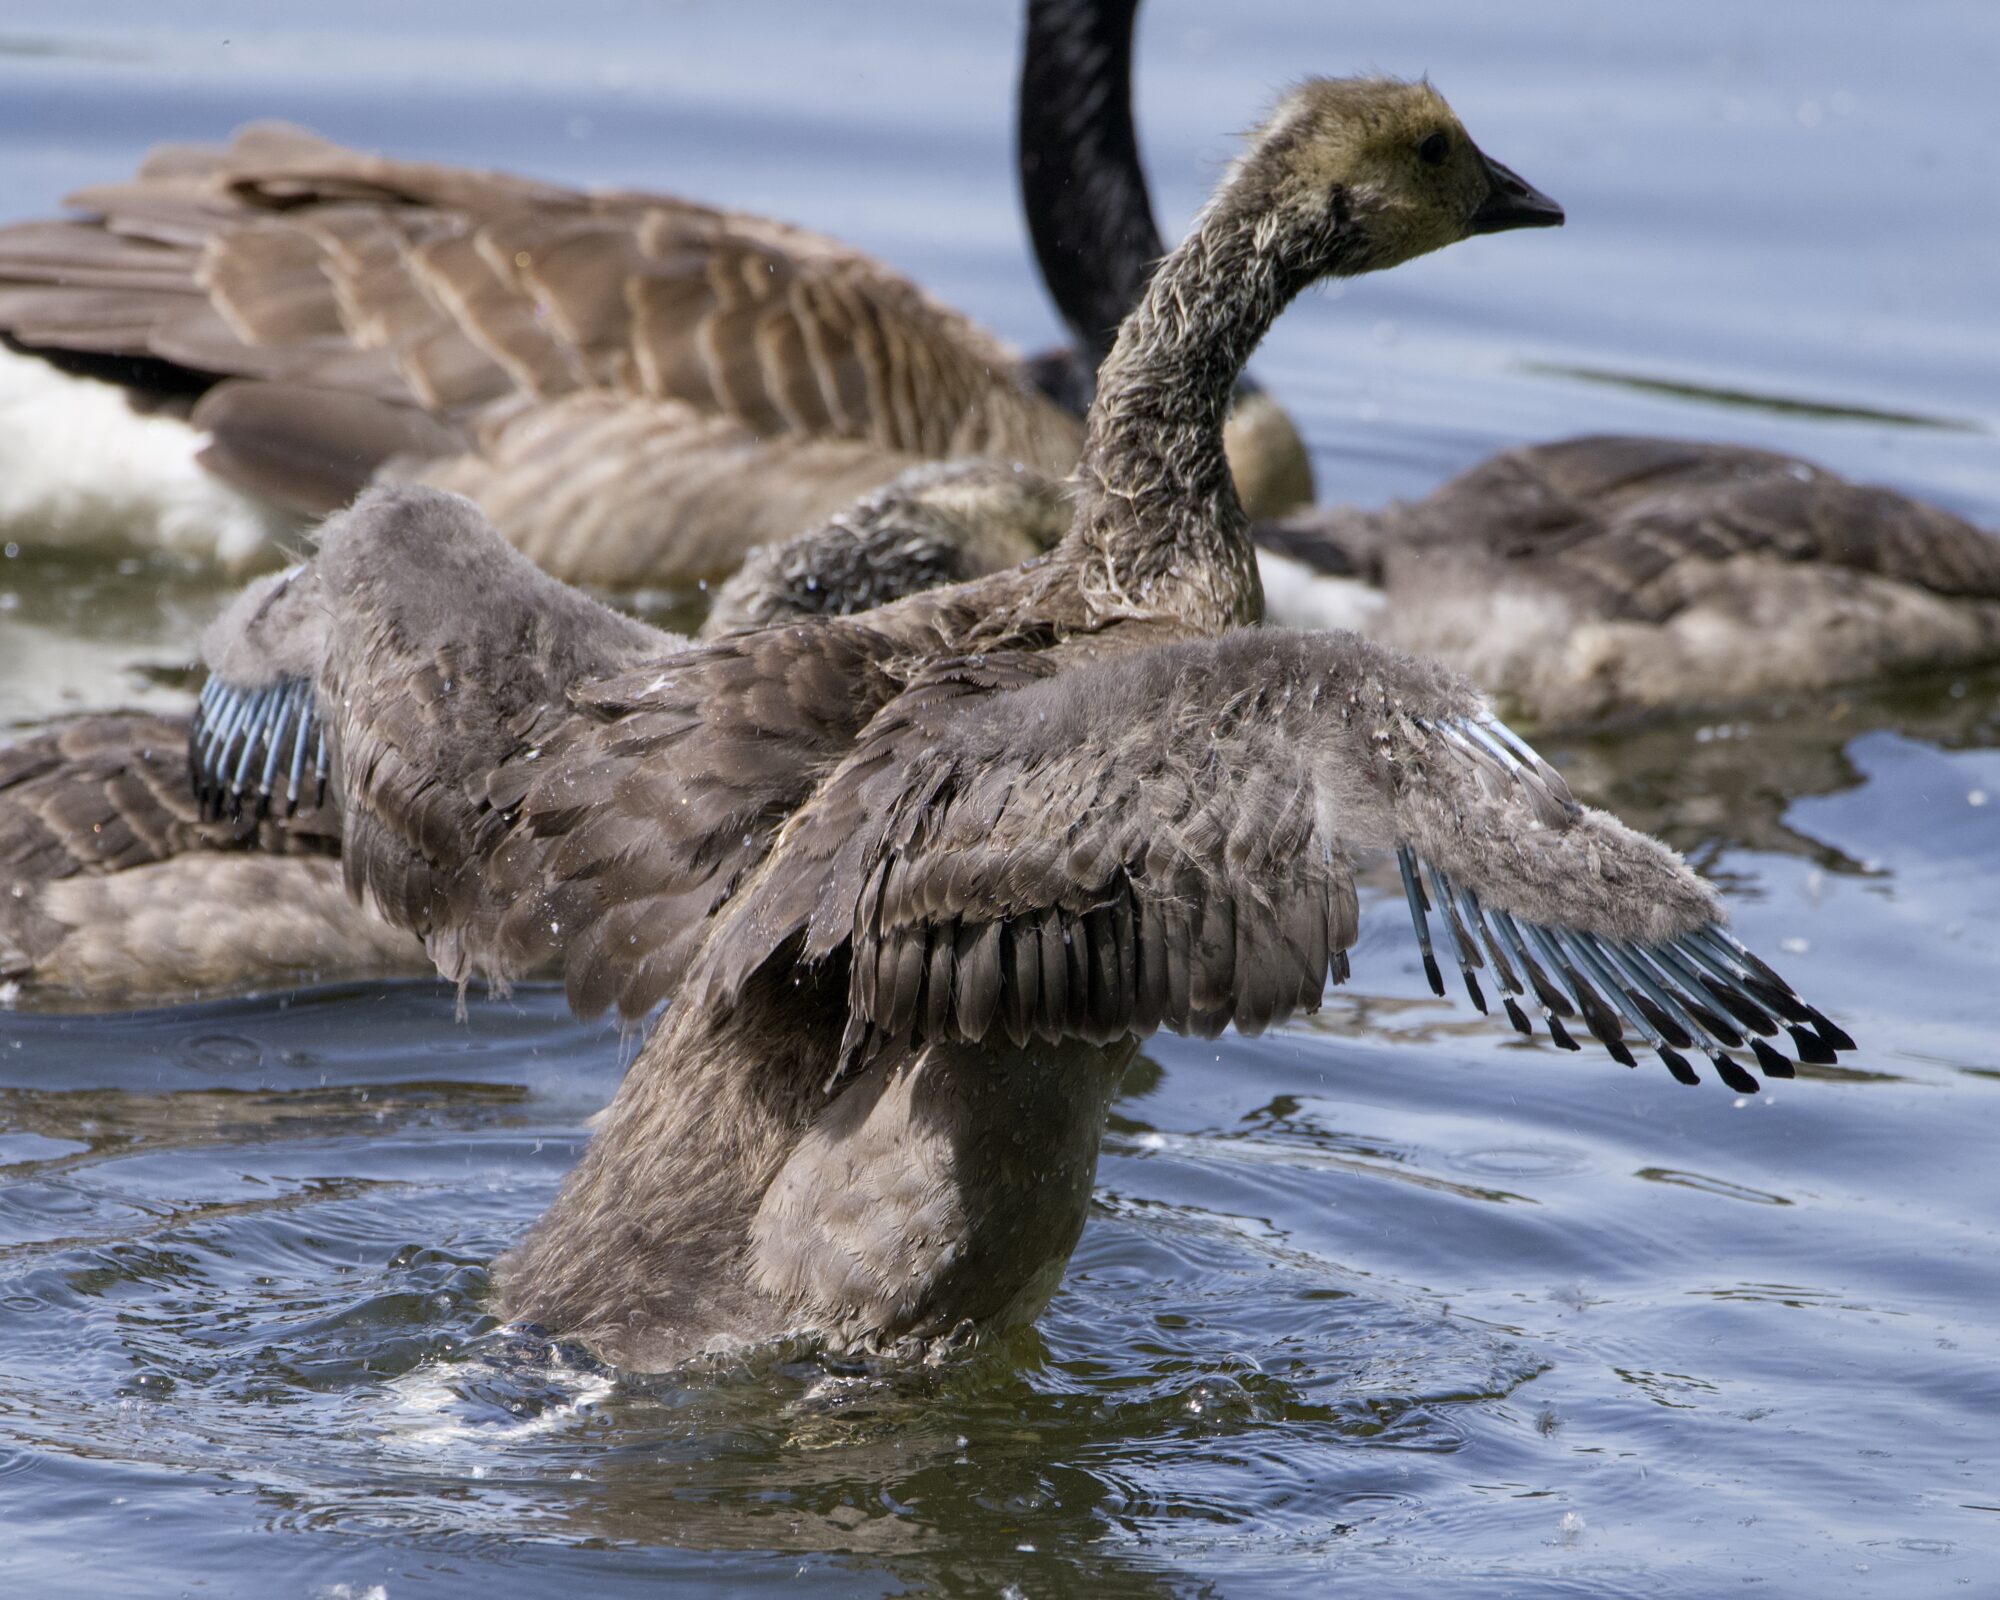 An adolescent Canada Goose flapping its wing. We see a number of bluish sheaths at the end of its wings, the sign of new feathers growing